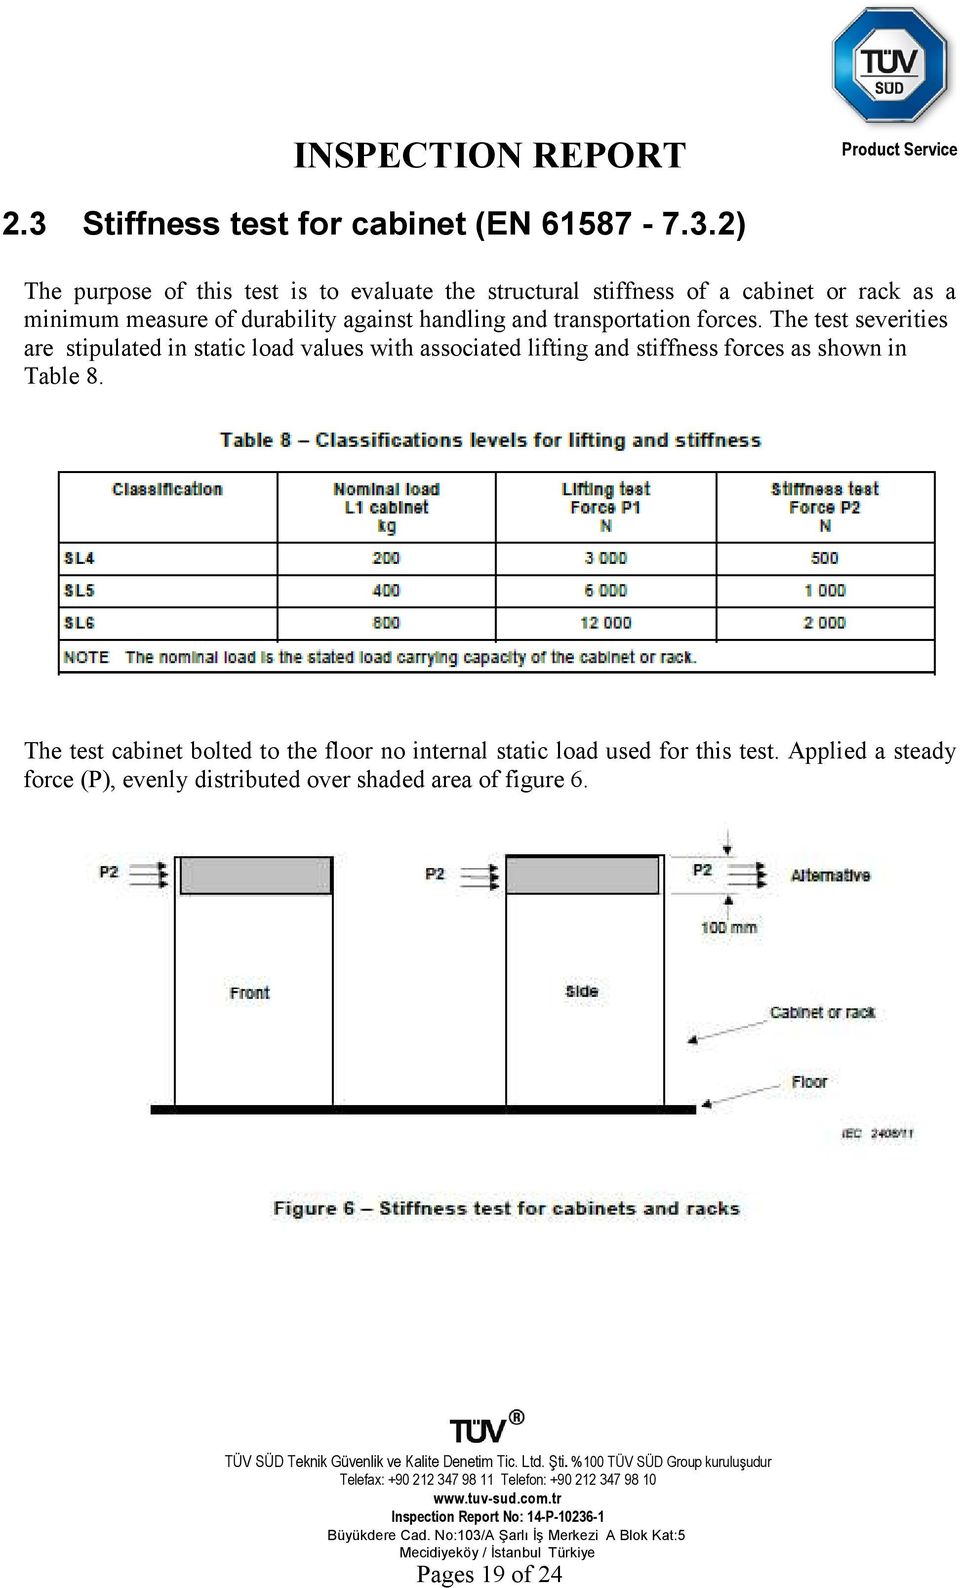 The test severities are stipulated in static load values with associated lifting and stiffness forces as shown in Table 8.